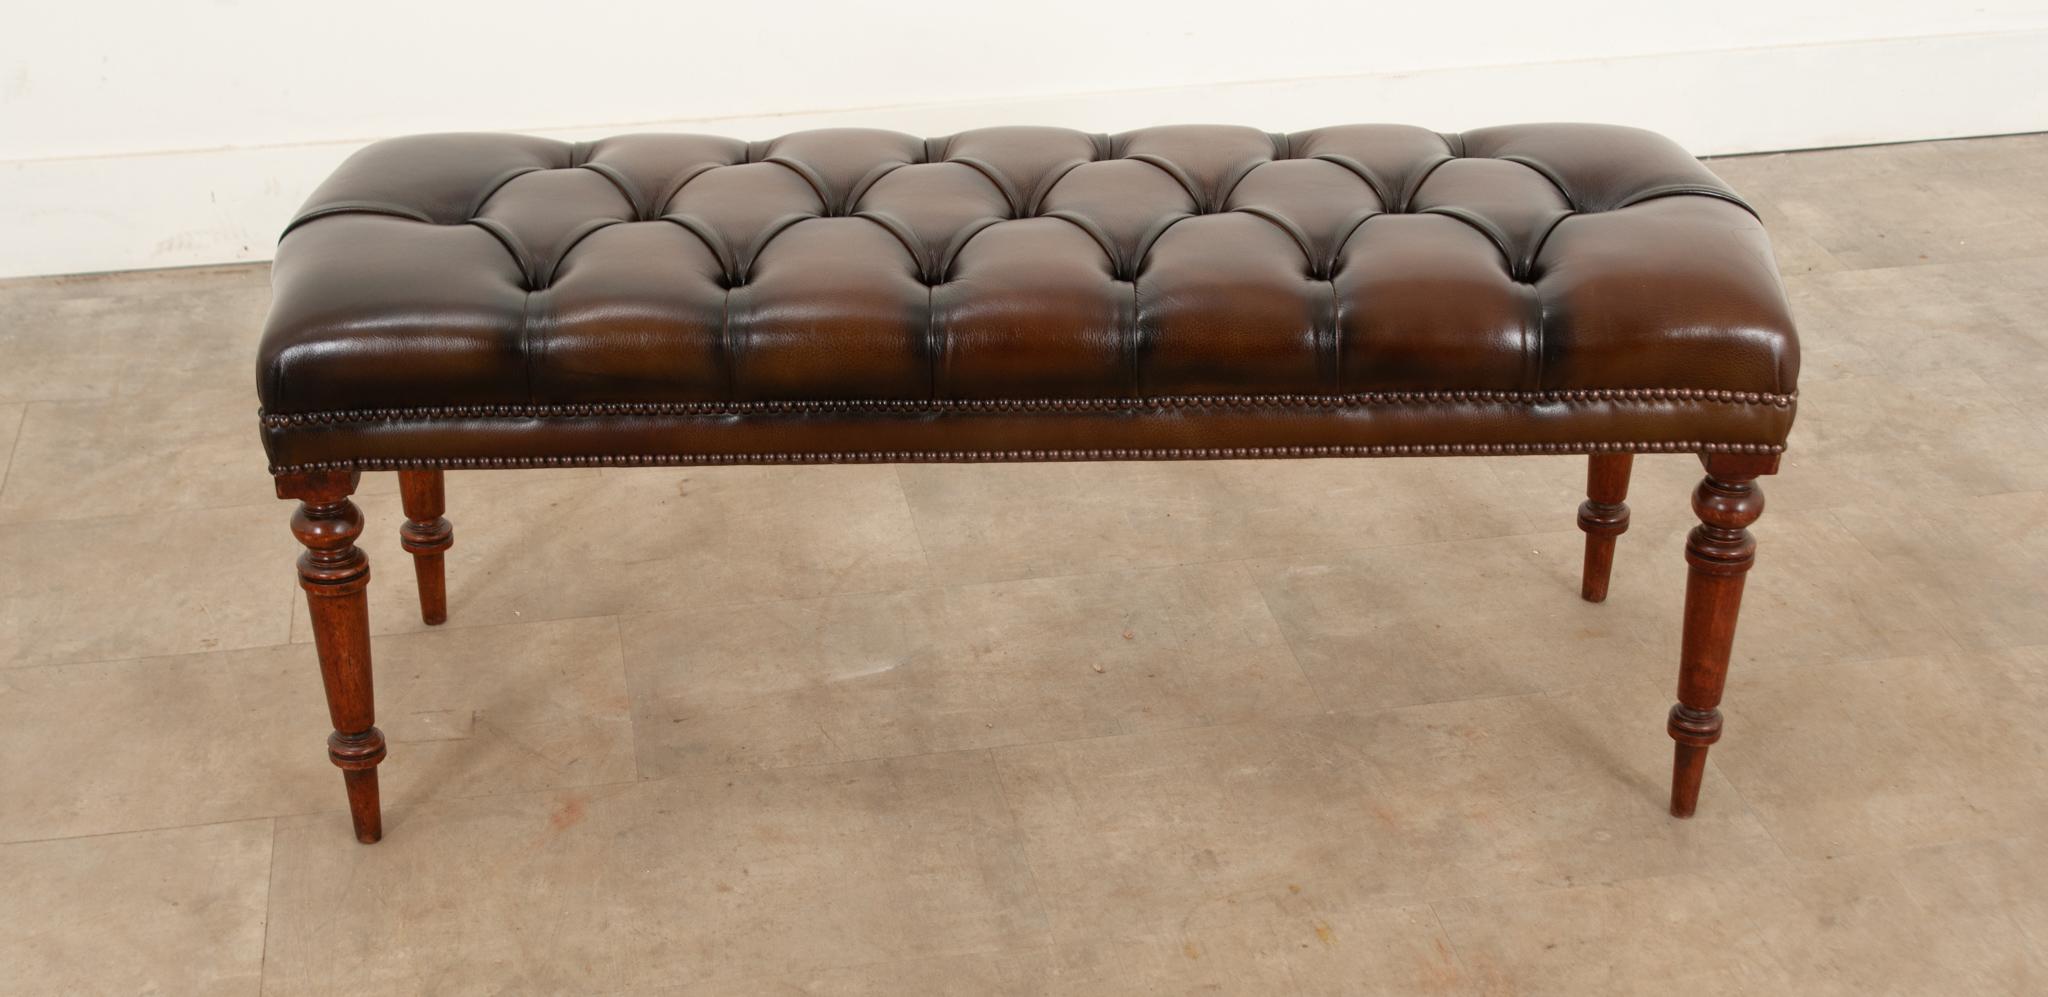 A handsome mahogany bench with beautifully turned legs, newly upholstered in tufted leather. The leather is a rich robust brown tone that gleams, with decorative rivets at the legs. For use as a comfortable seat or as a posh coffee table with use of